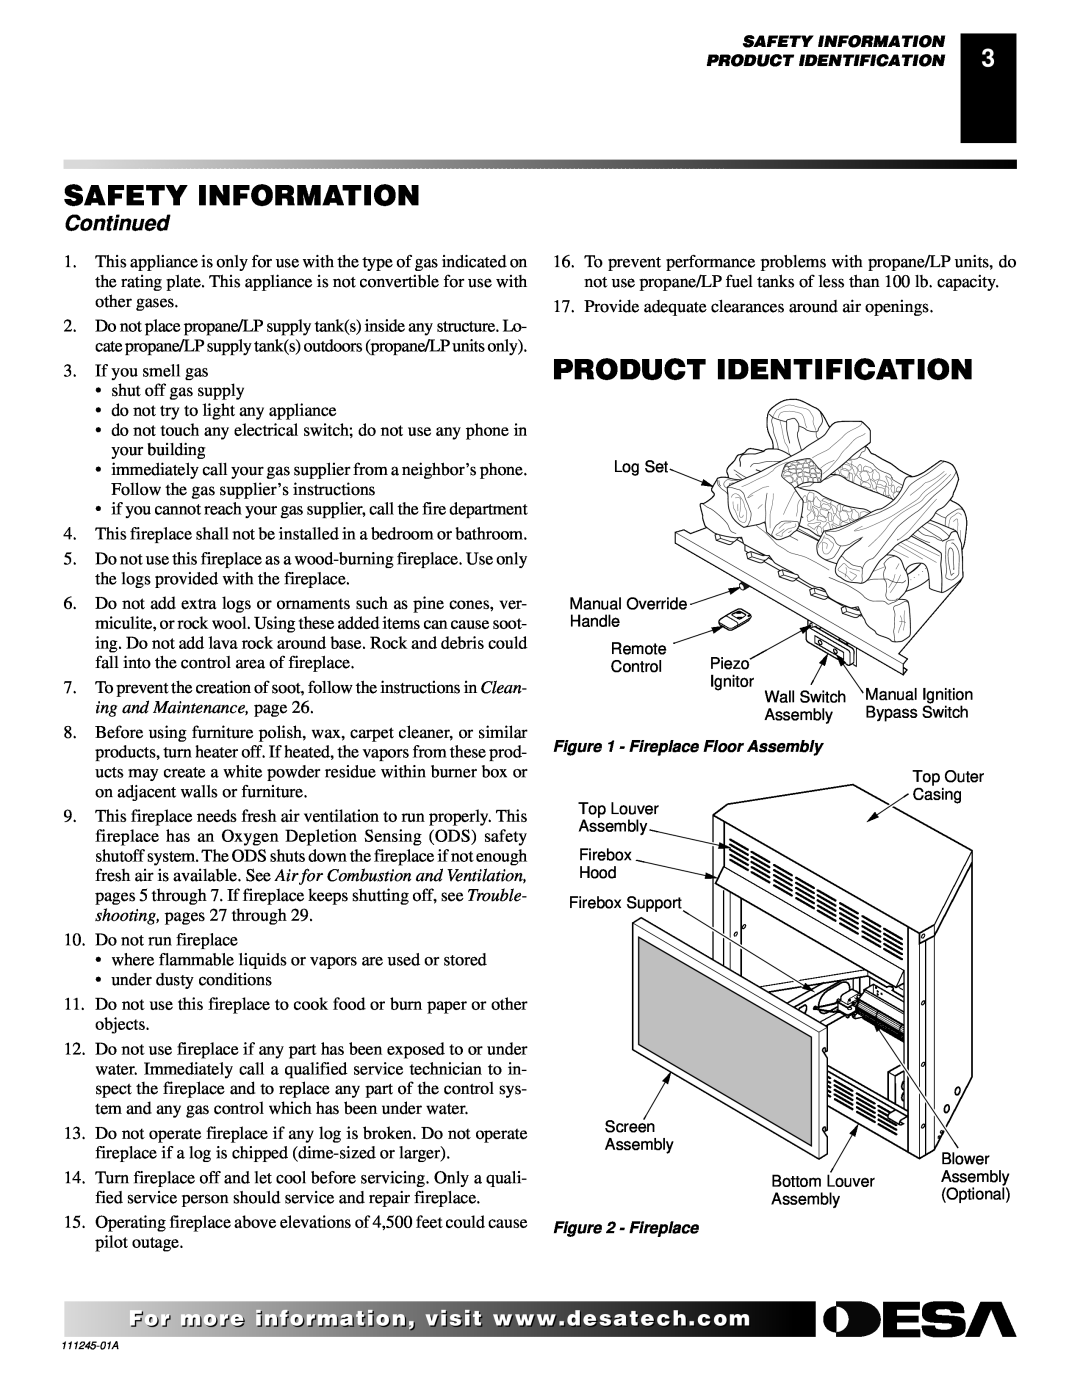 Desa CGEFP33NRB, CGEFP33PRB installation manual Product Identification, Continued, Safety Information 